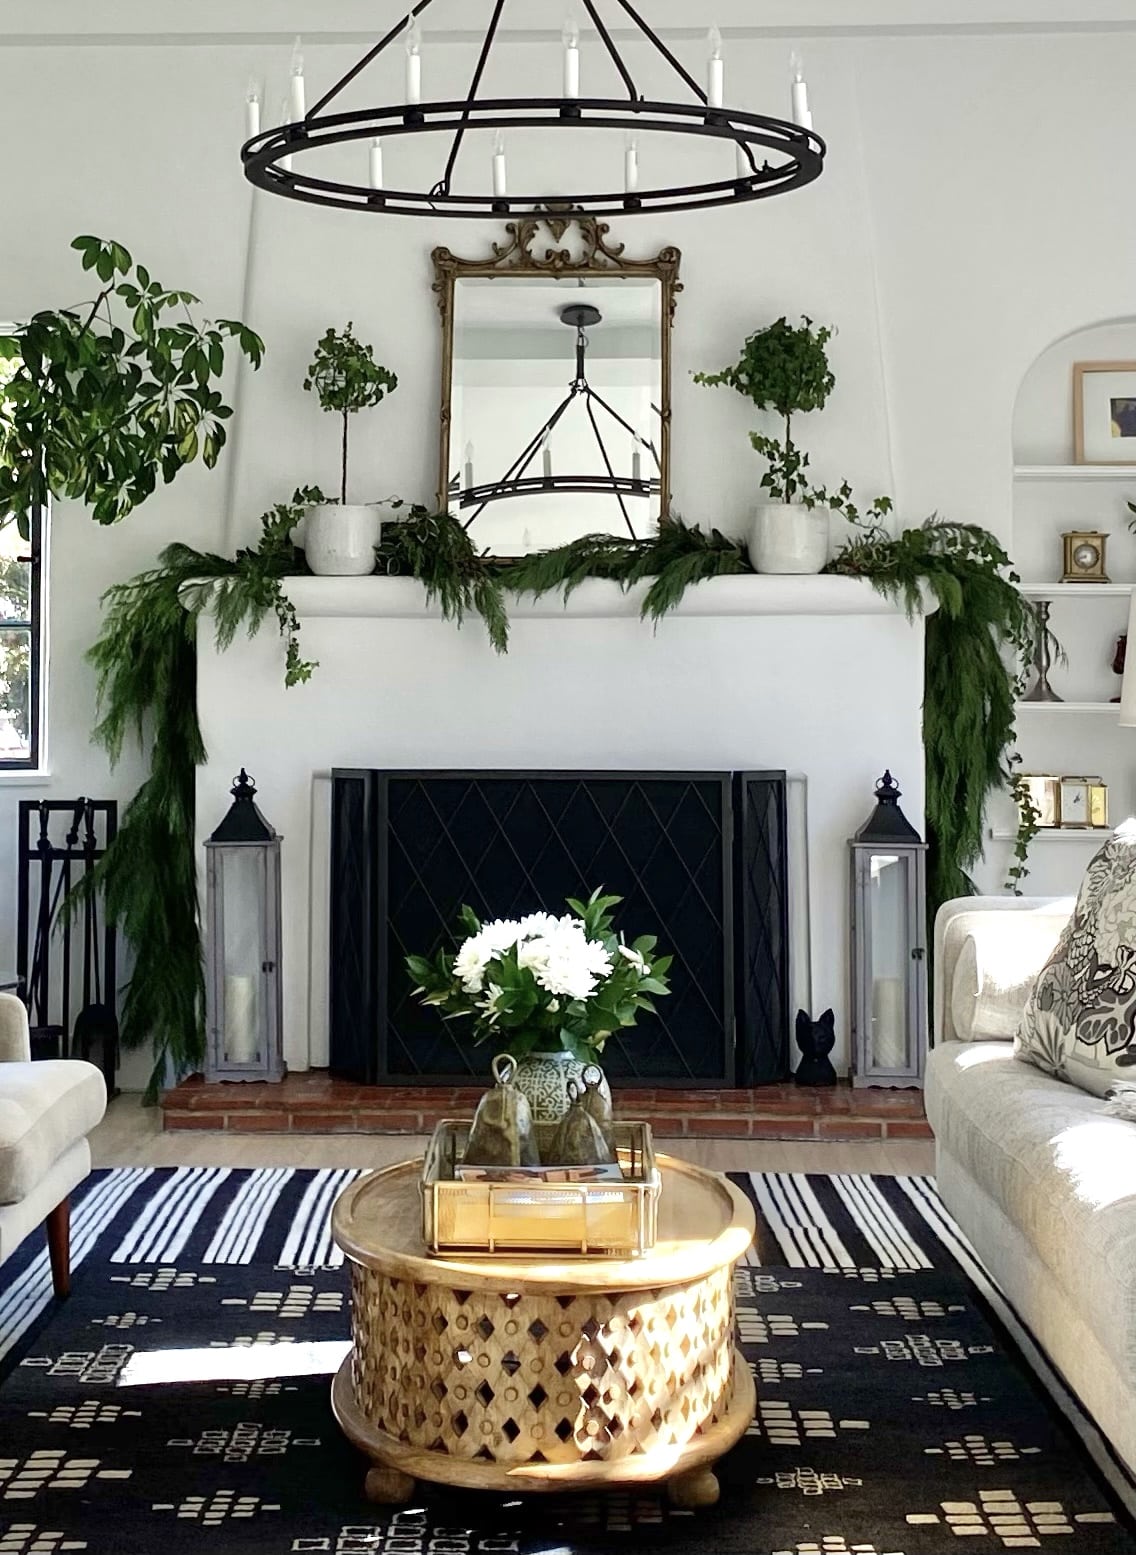 22+Festive+Decor+Finds+with+a+Chic+Twist